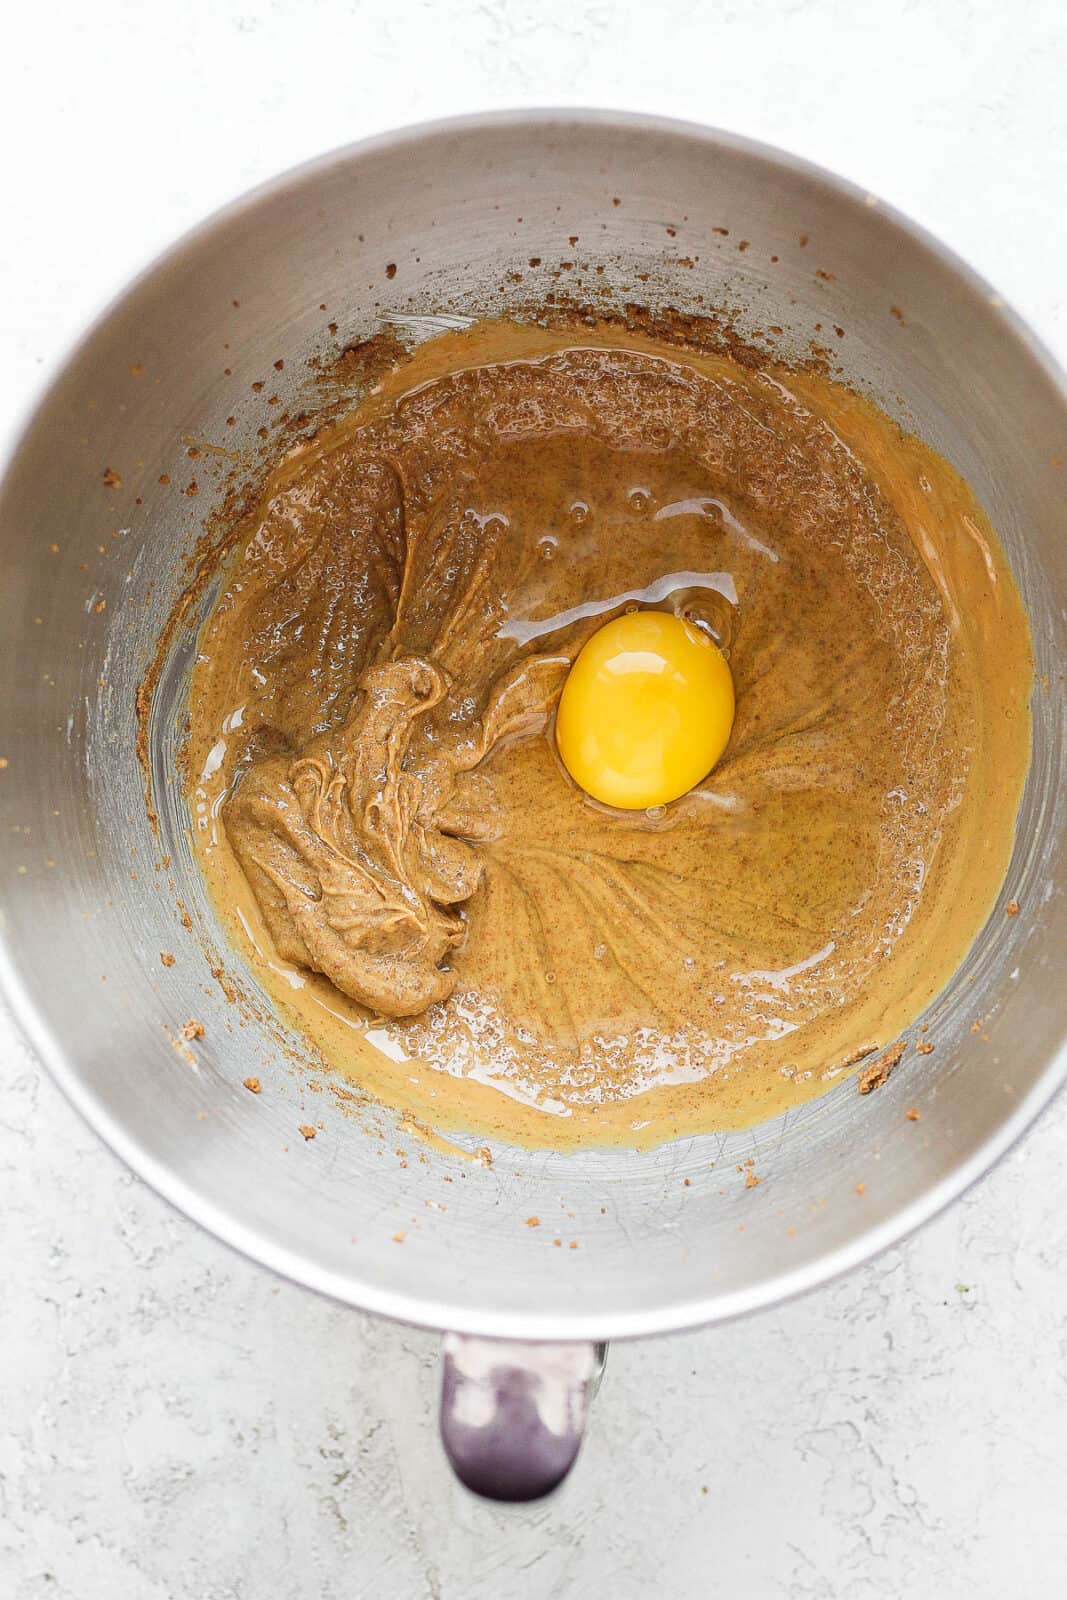 Egg, peanut butter and coconut sugar mixed together in a bowl with egg on top.